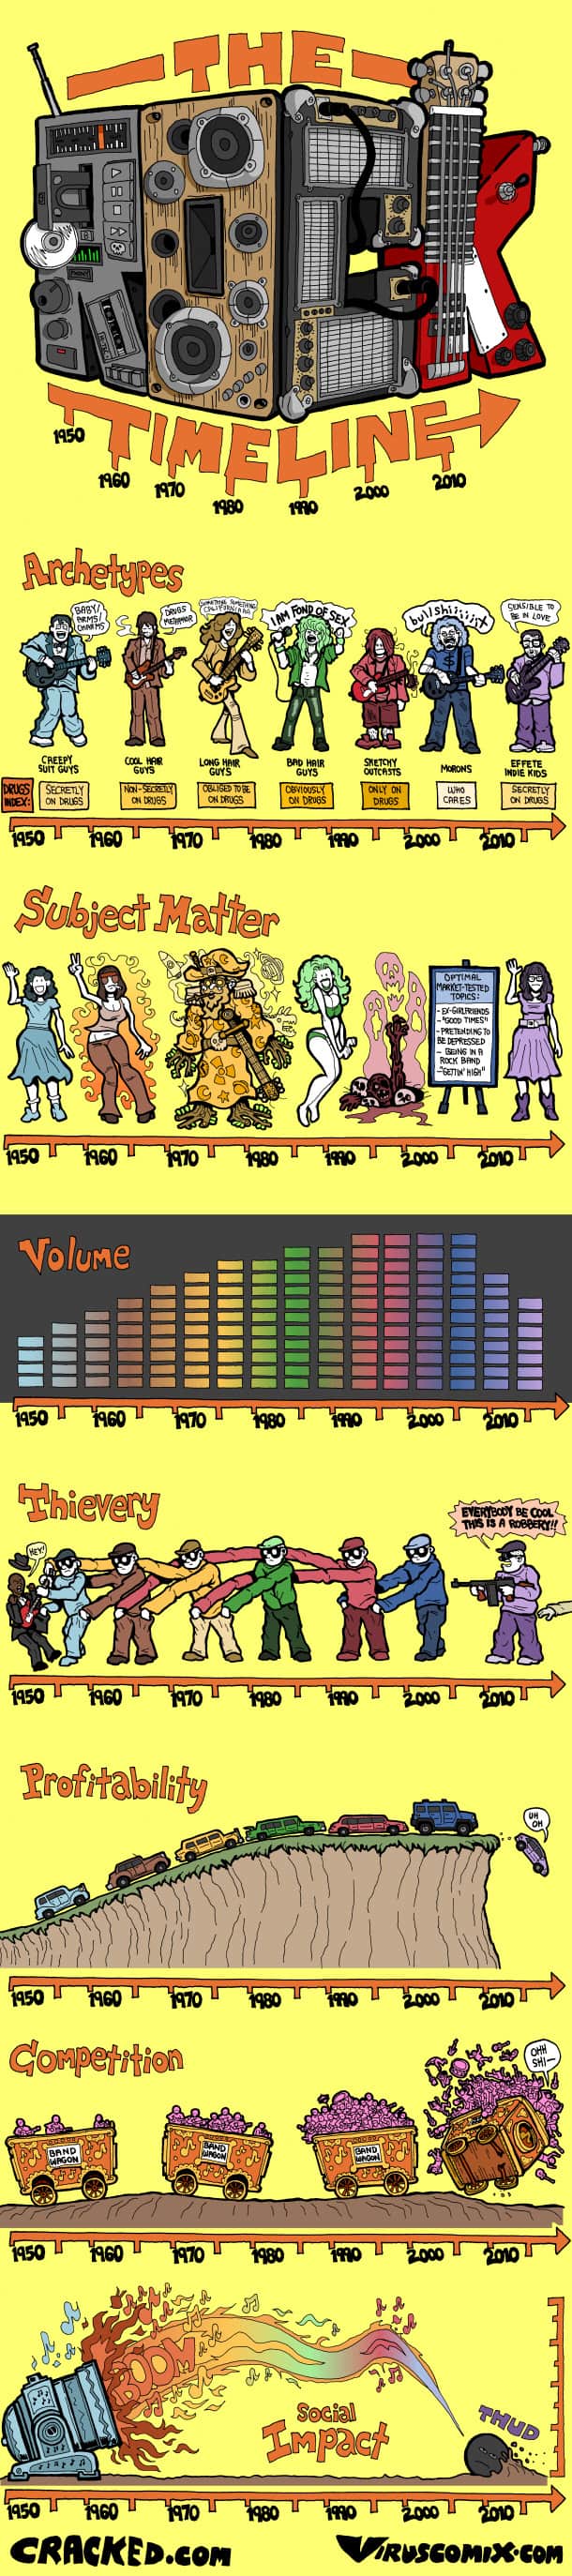 History of Rock Music Infographic